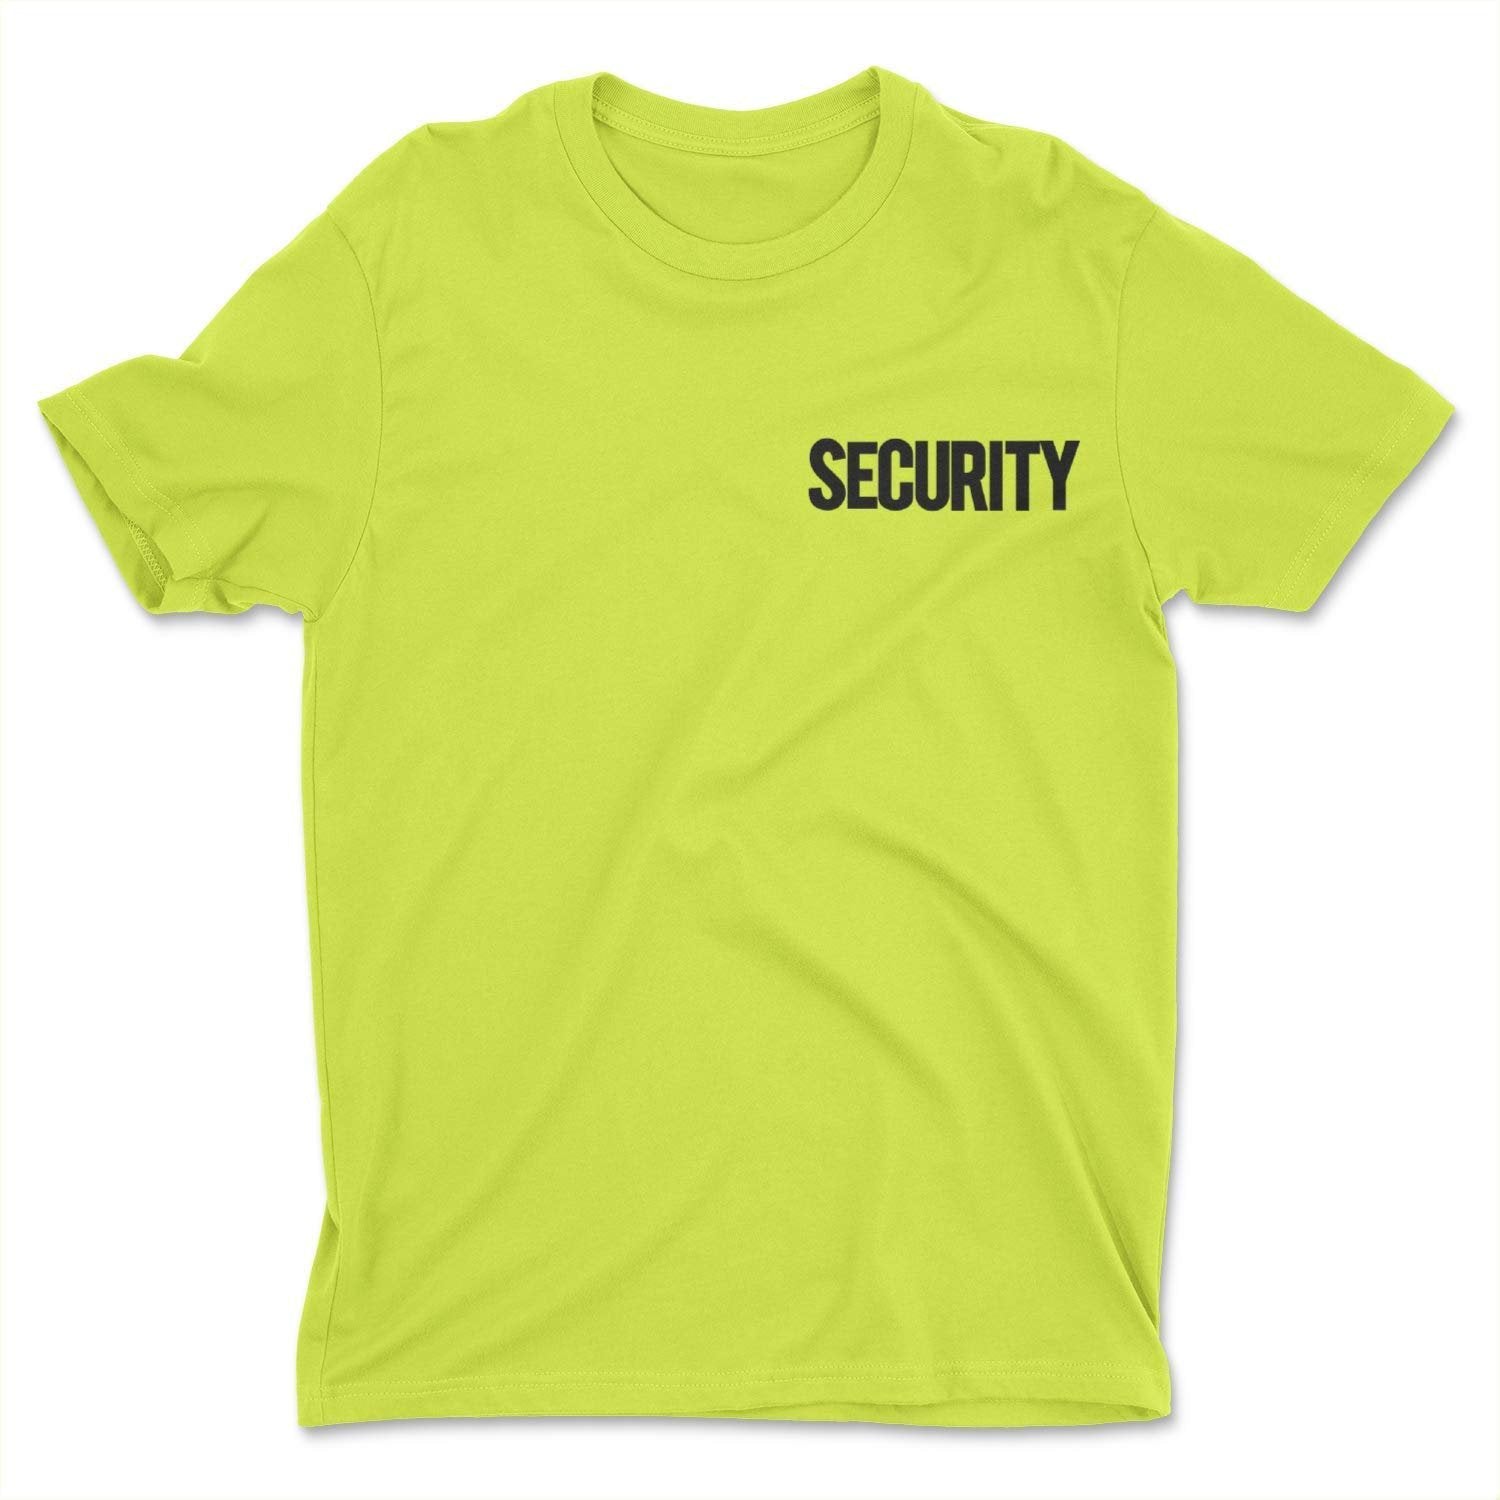 Men's Security T-Shirt (Chest & Back Print, Safety Green/Black)